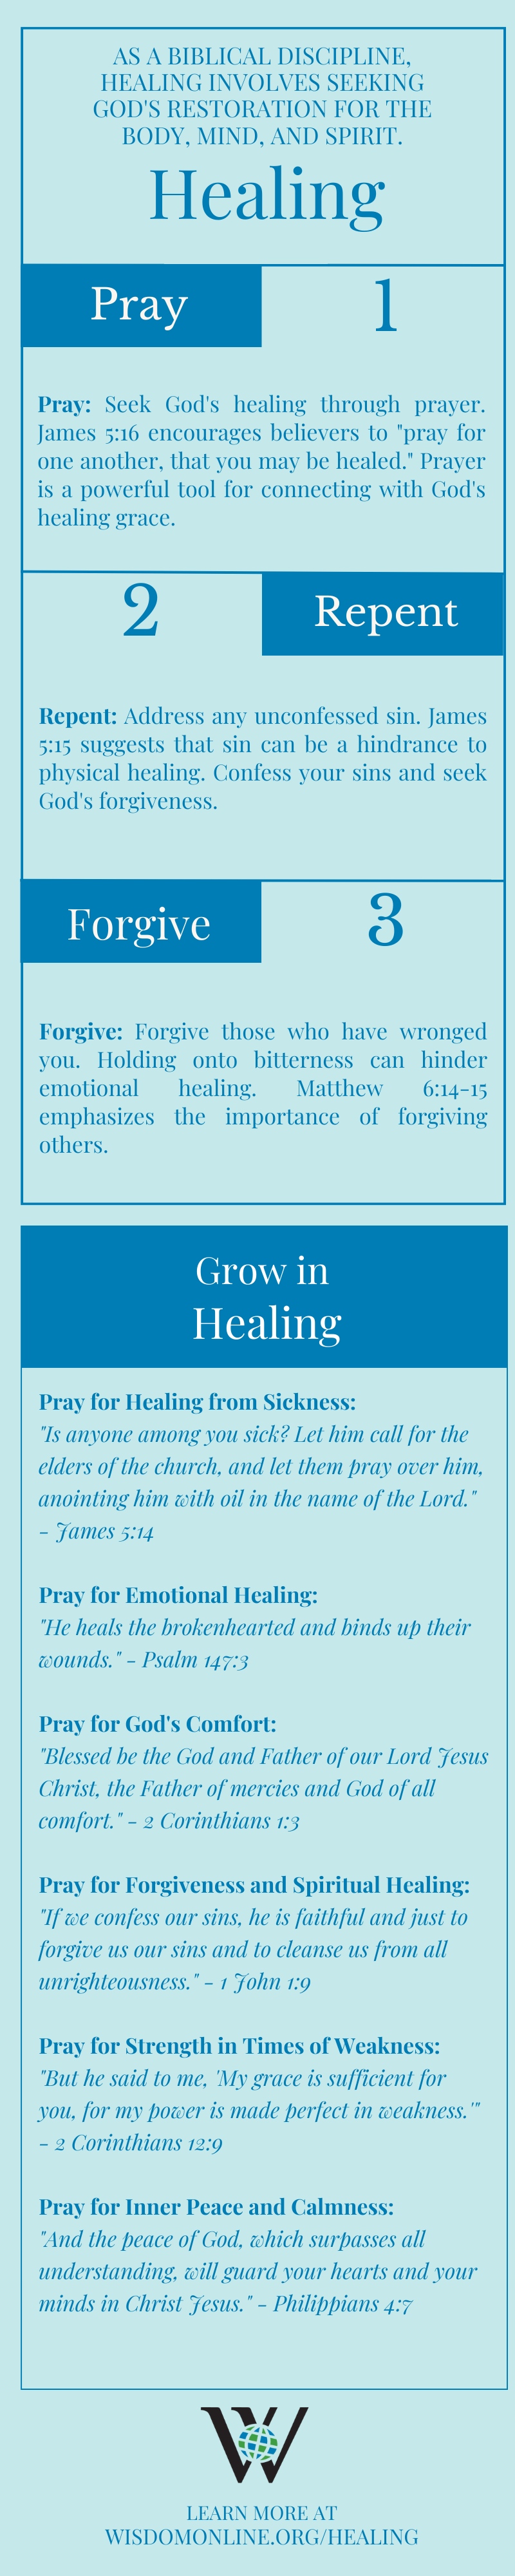 Infographic on the Biblical characteristic of Healing